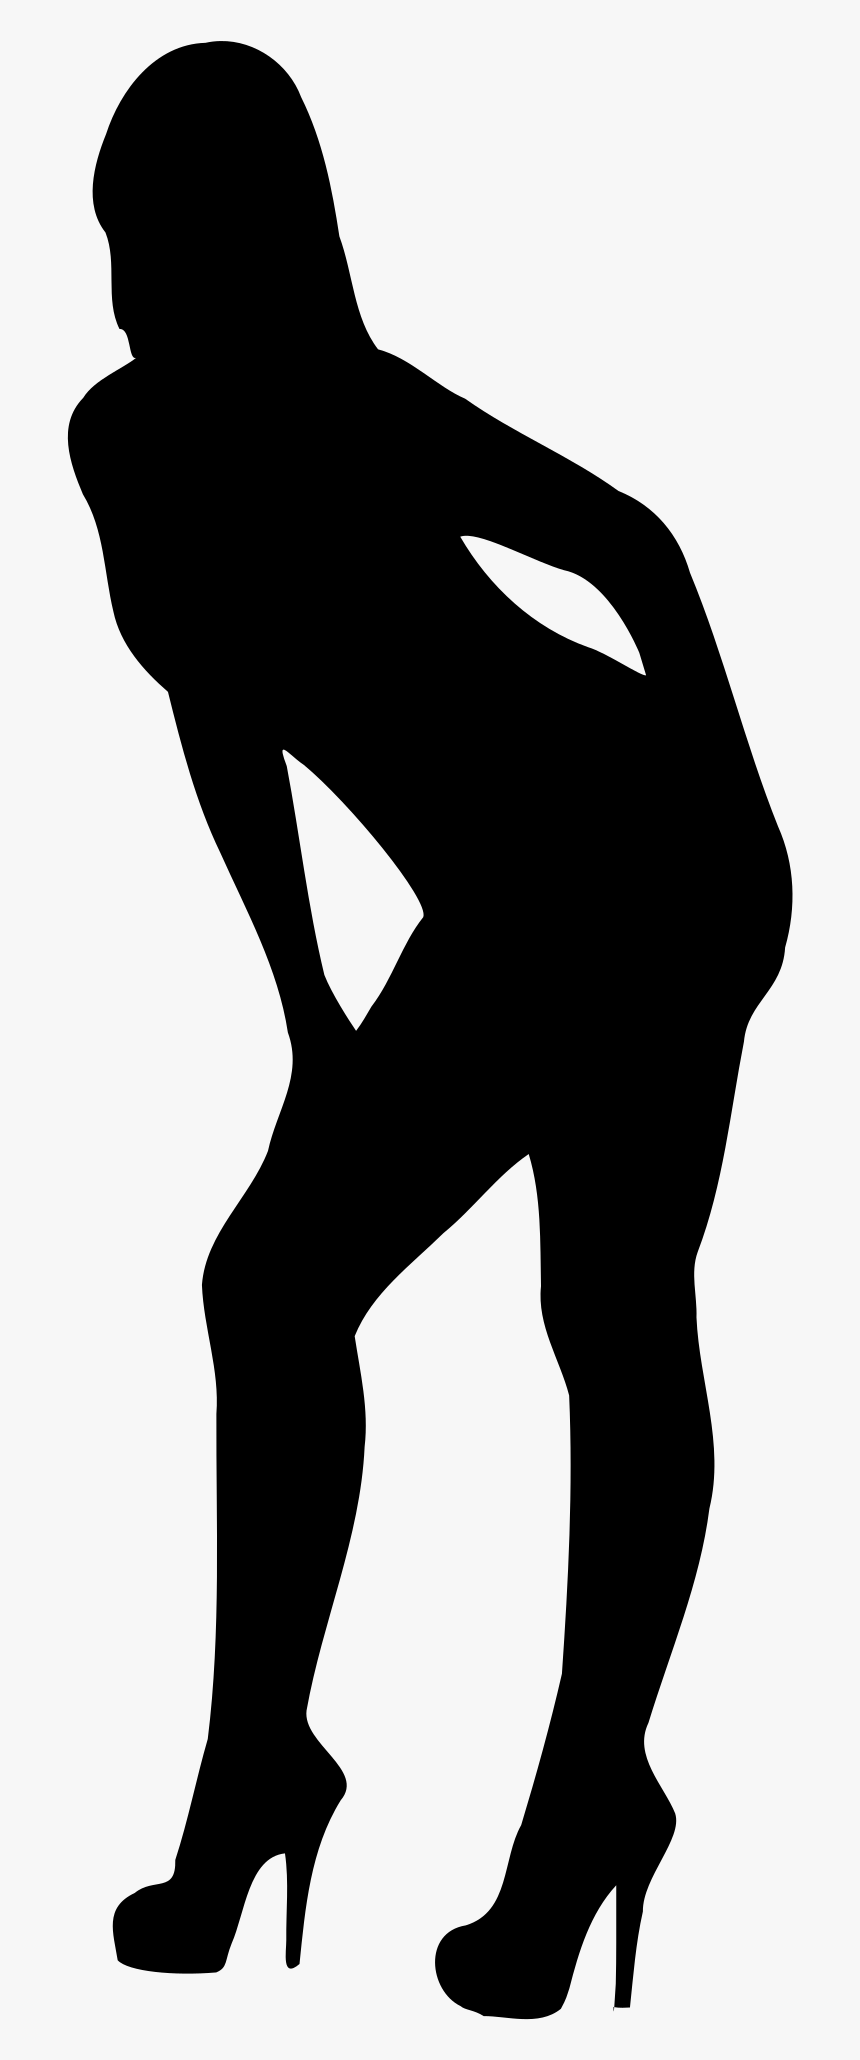 Chat At Getdrawings Com - Hot Woman Silhouette Clipart, HD Png Download, Free Download